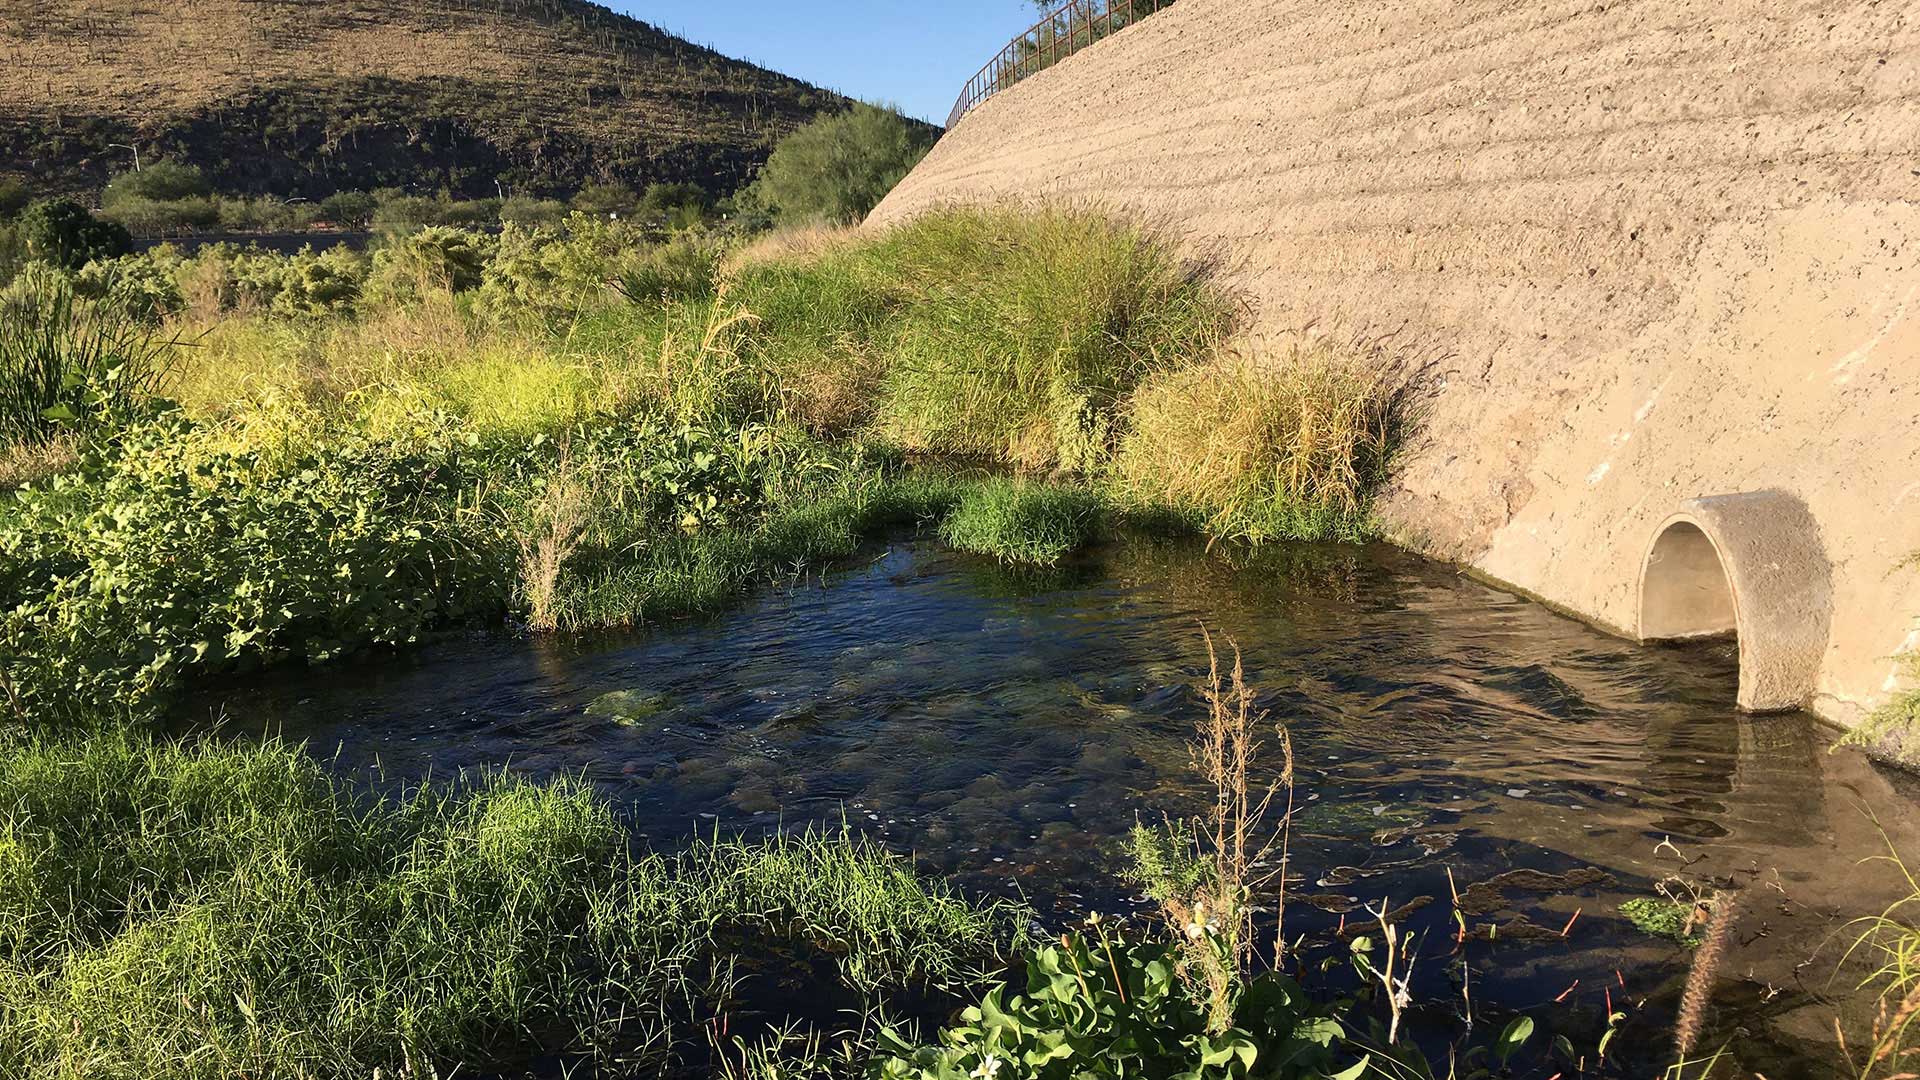 Since late June 2019, Tucson Water has been recharging treated wastewater into the dry channel of the Santa Cruz River, creating a riparian oasis.